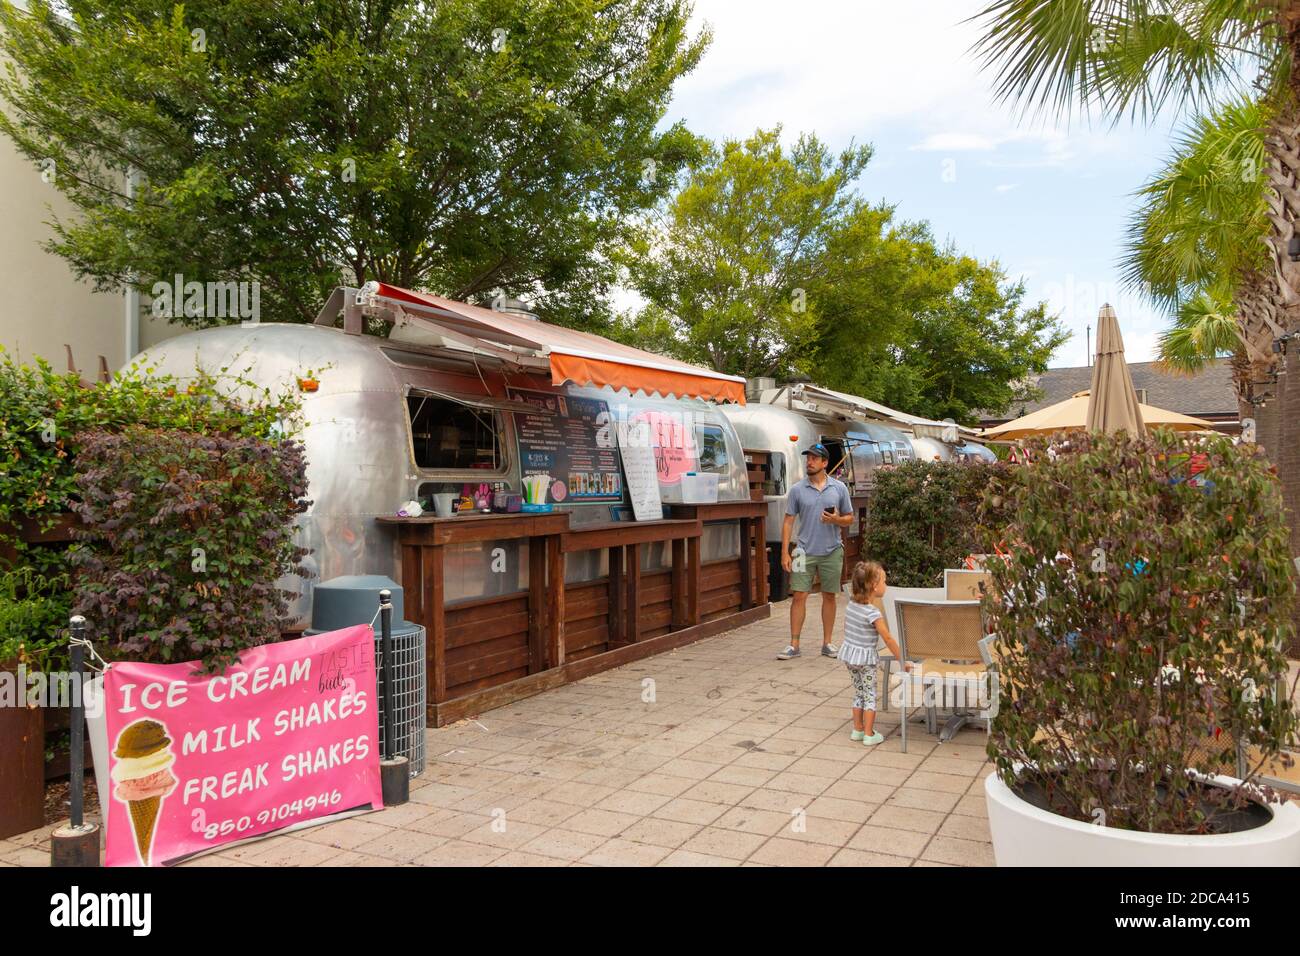 man and child outside Airstream cafe and ice cream servery in Pensacola Florida Stock Photo